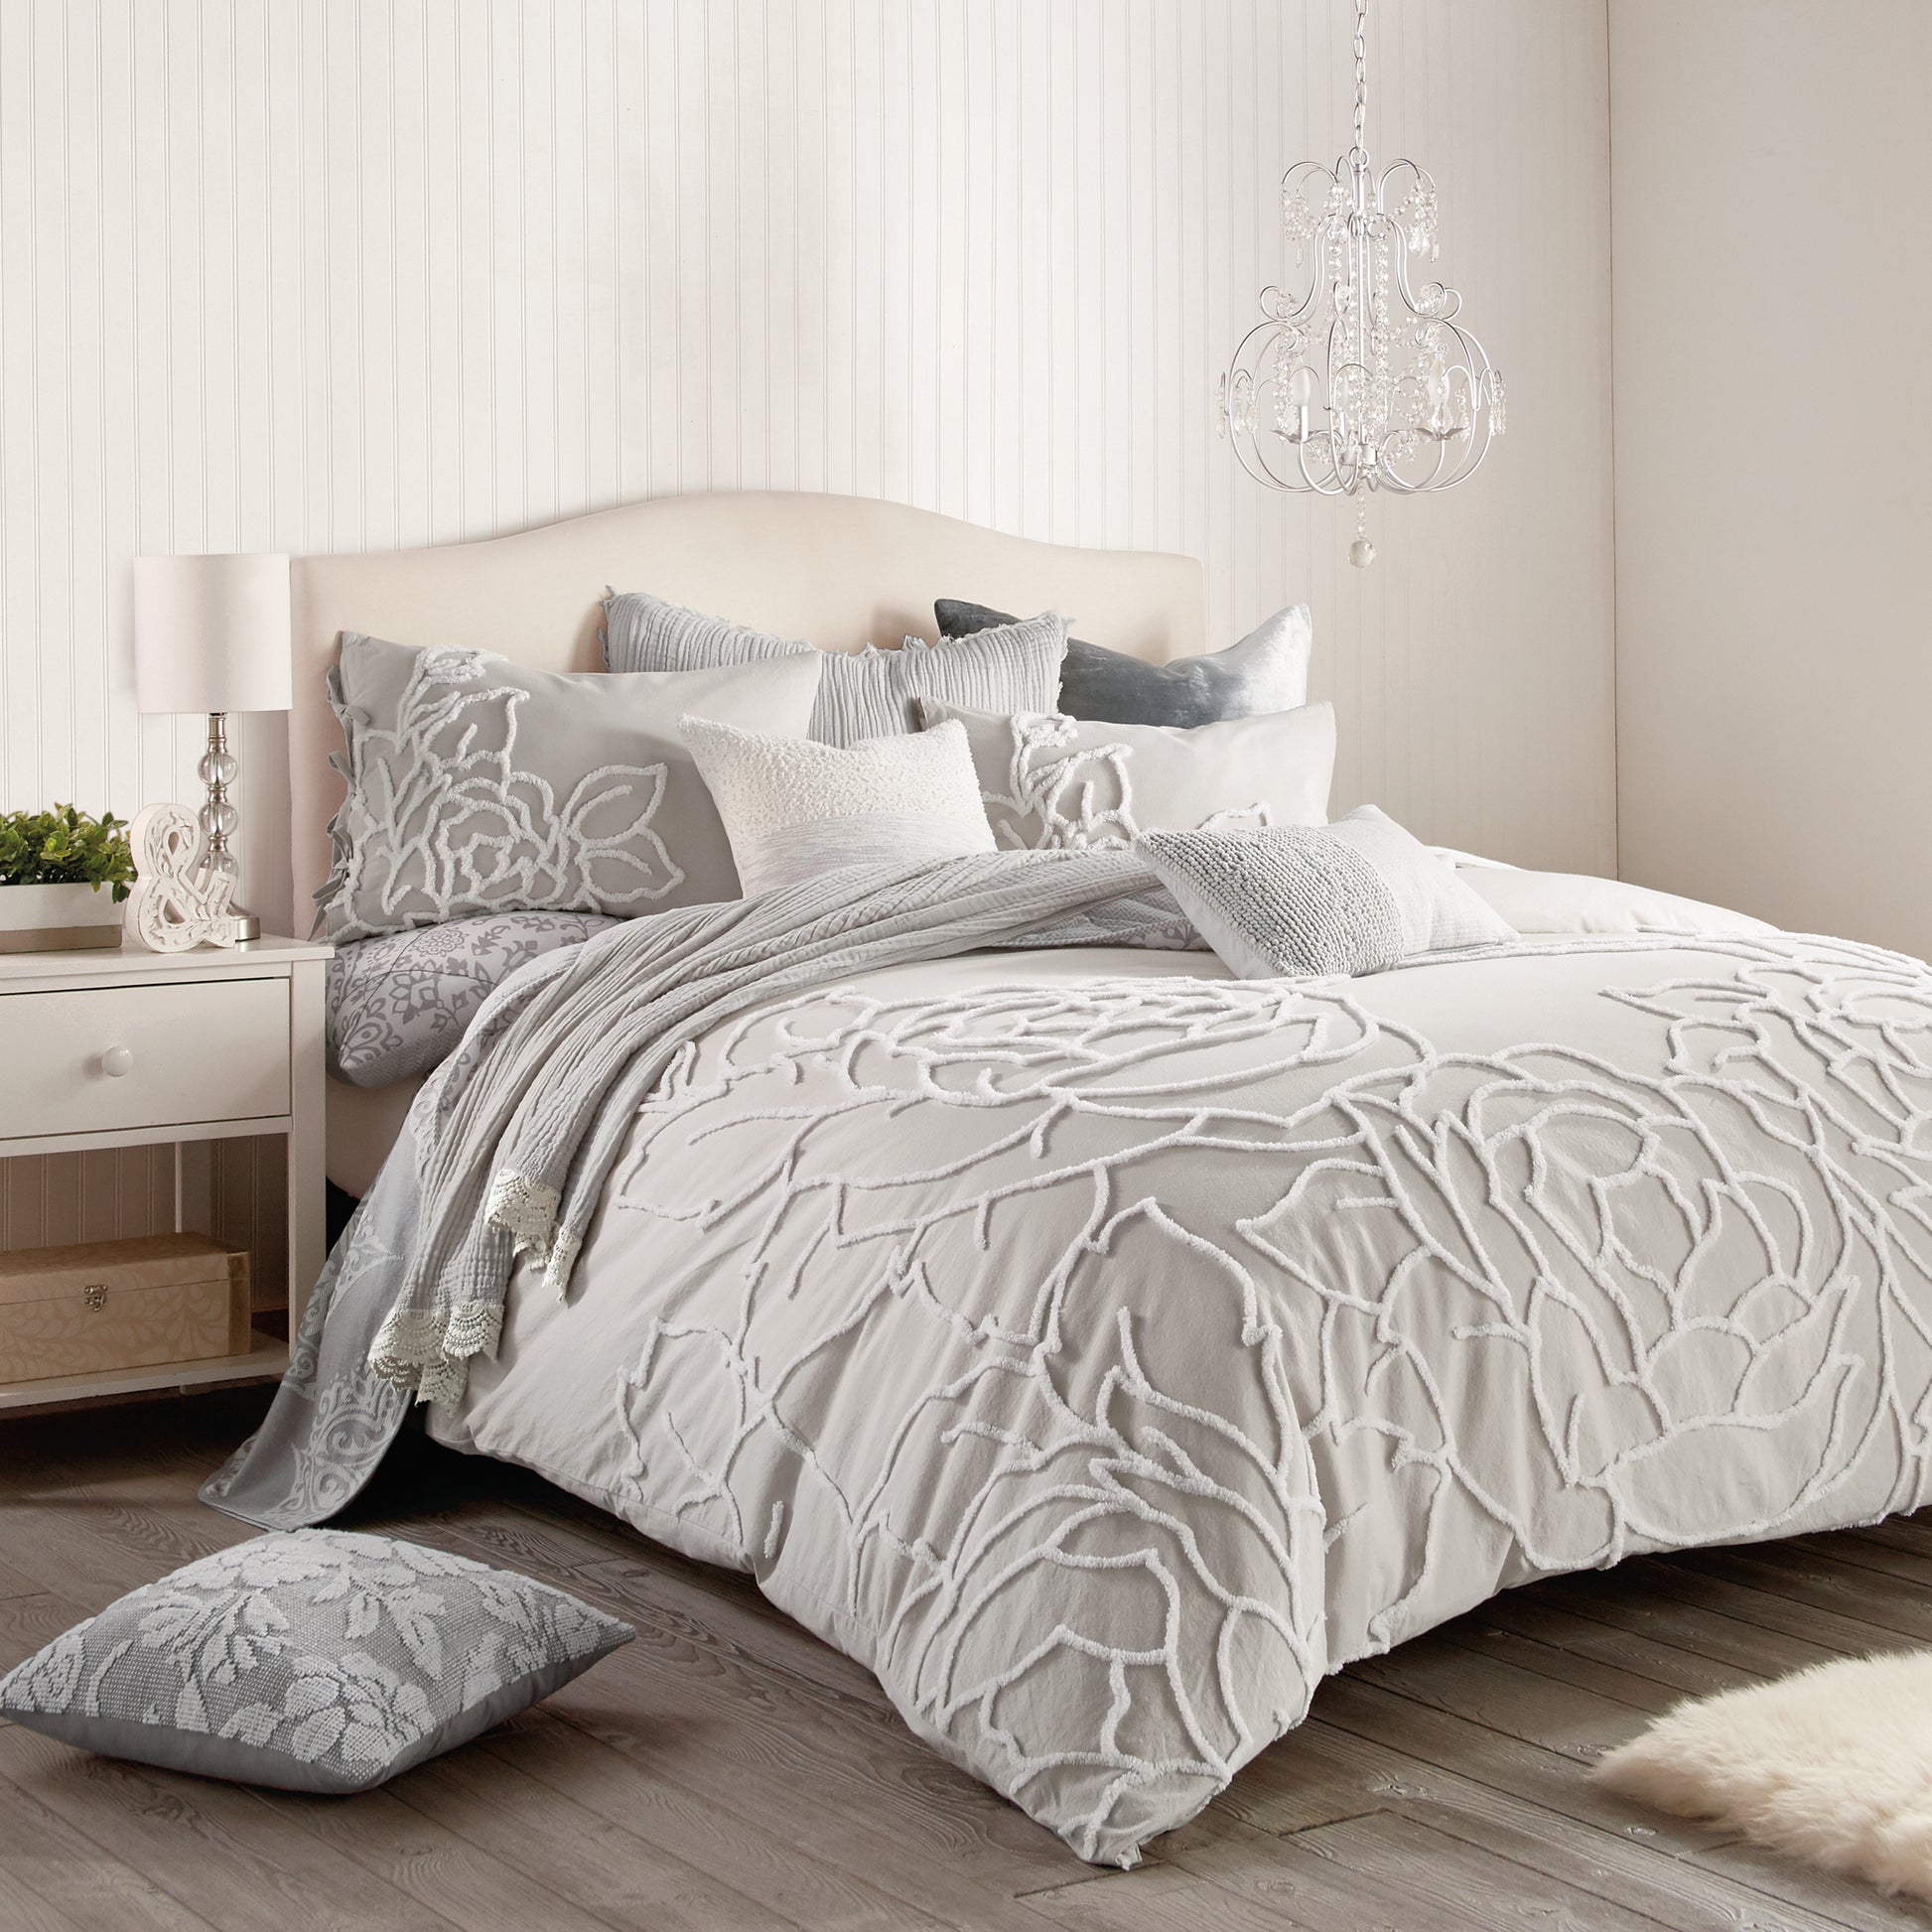 Peri Home Chenille Rose Comforter Bedding Collection